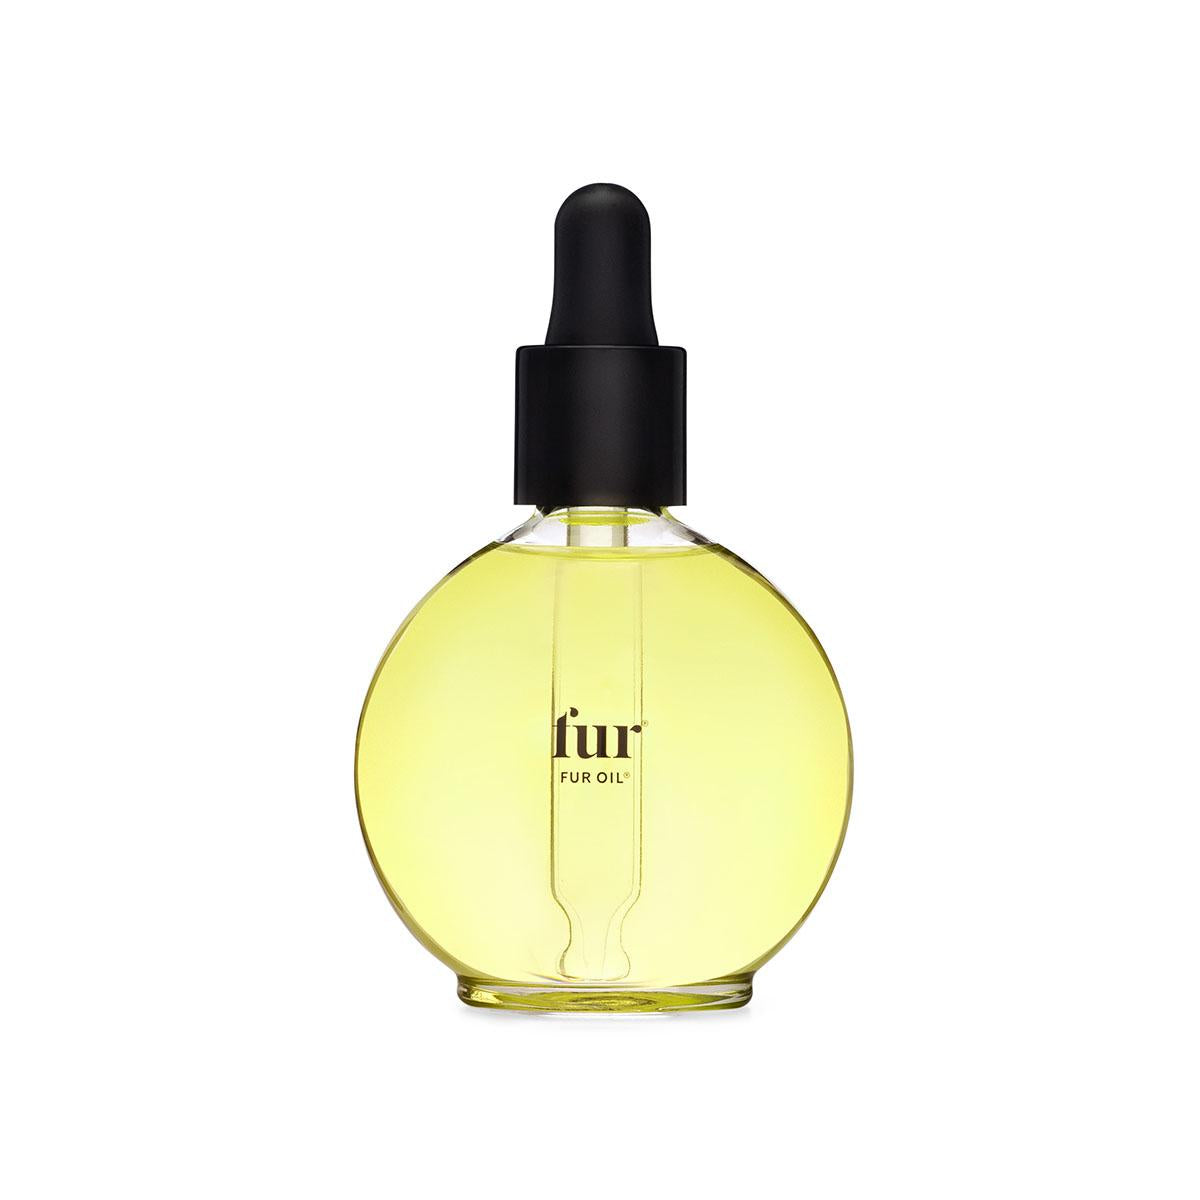 Primary image of Fur Oil